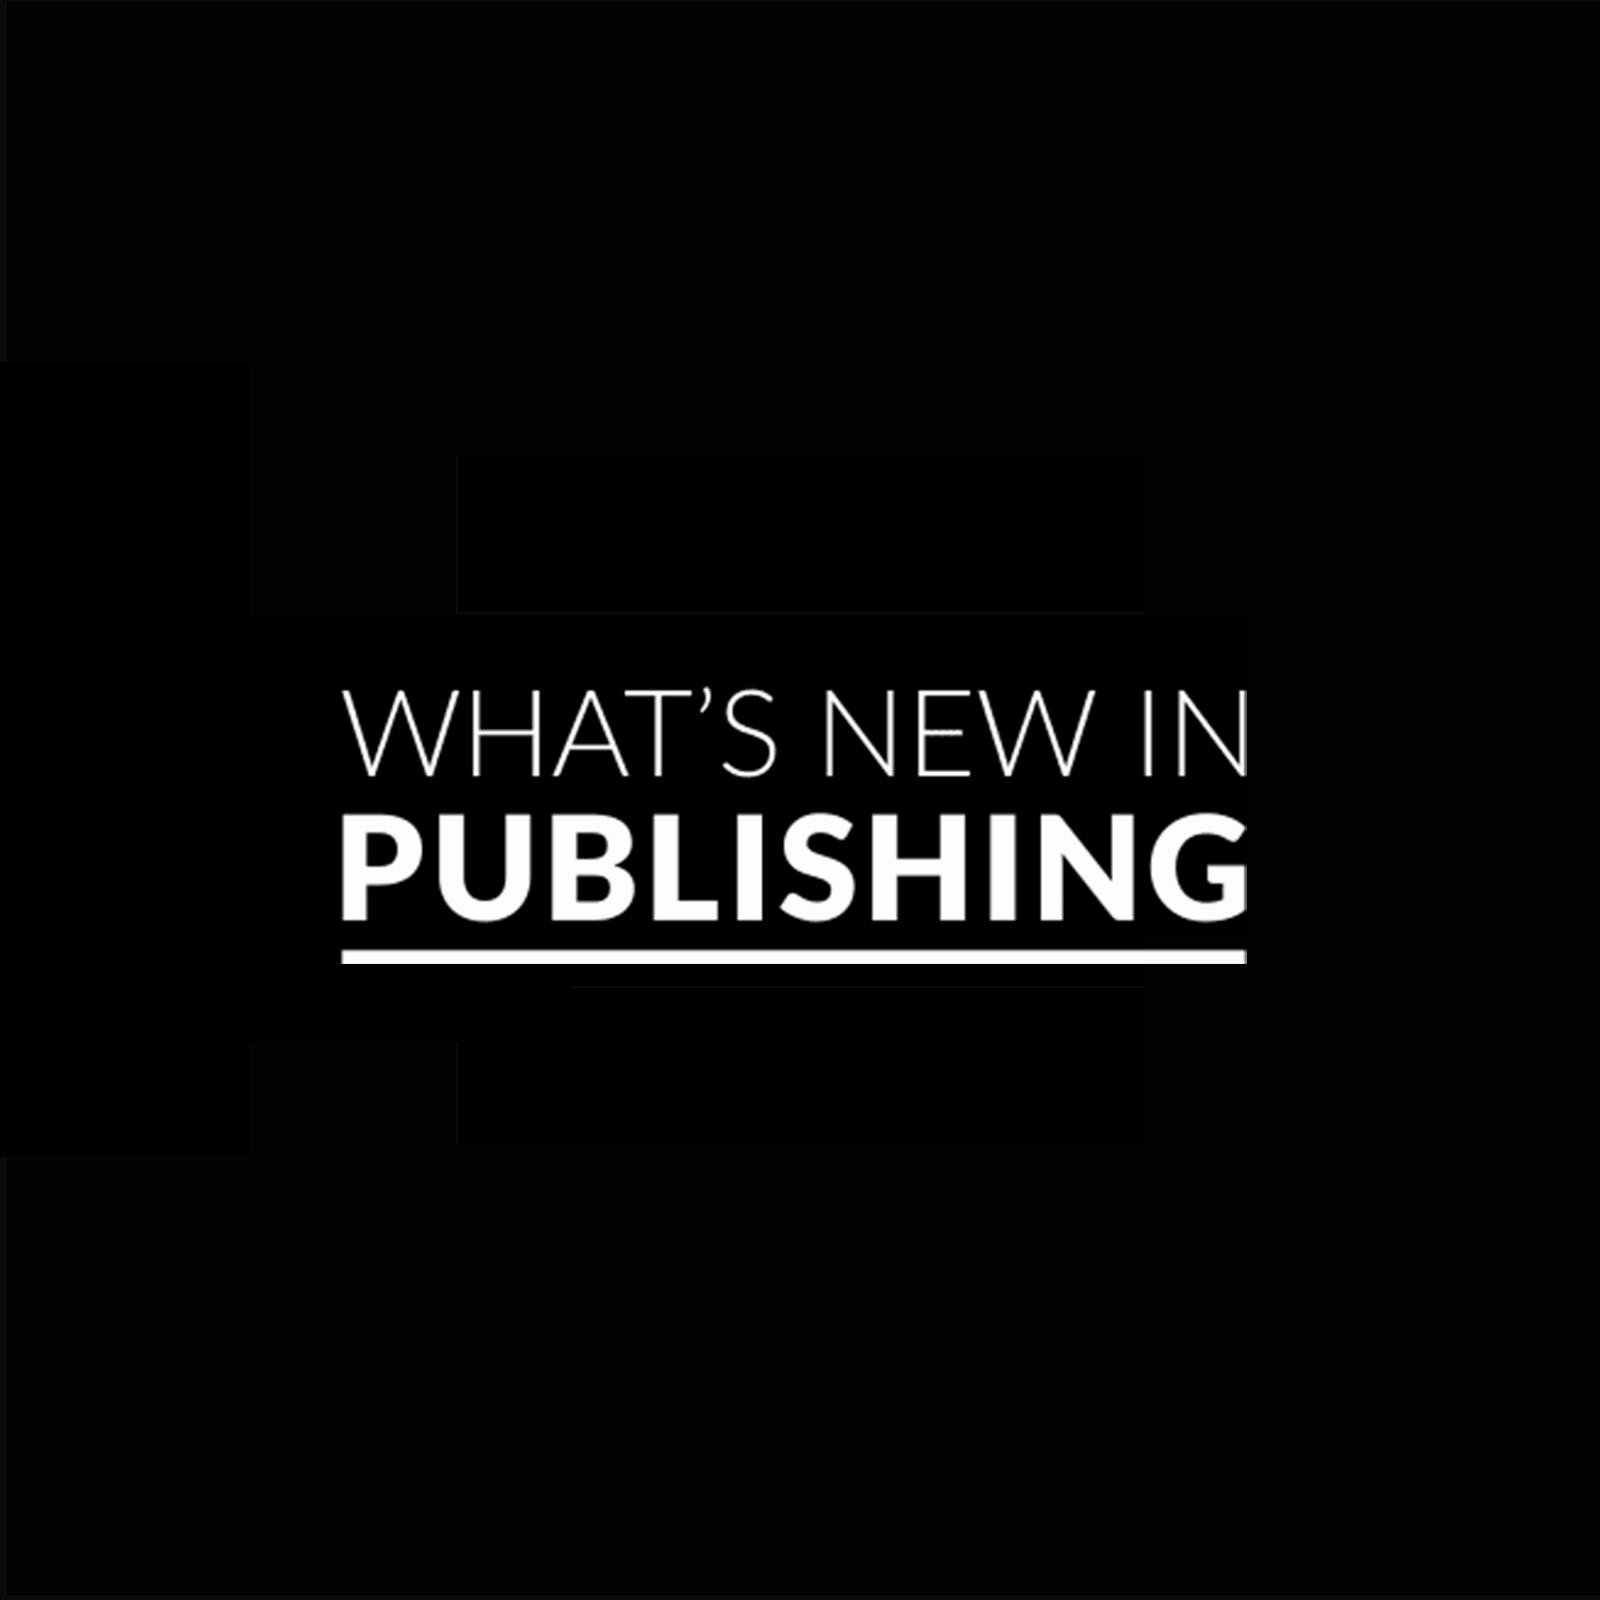 whats new in publishing